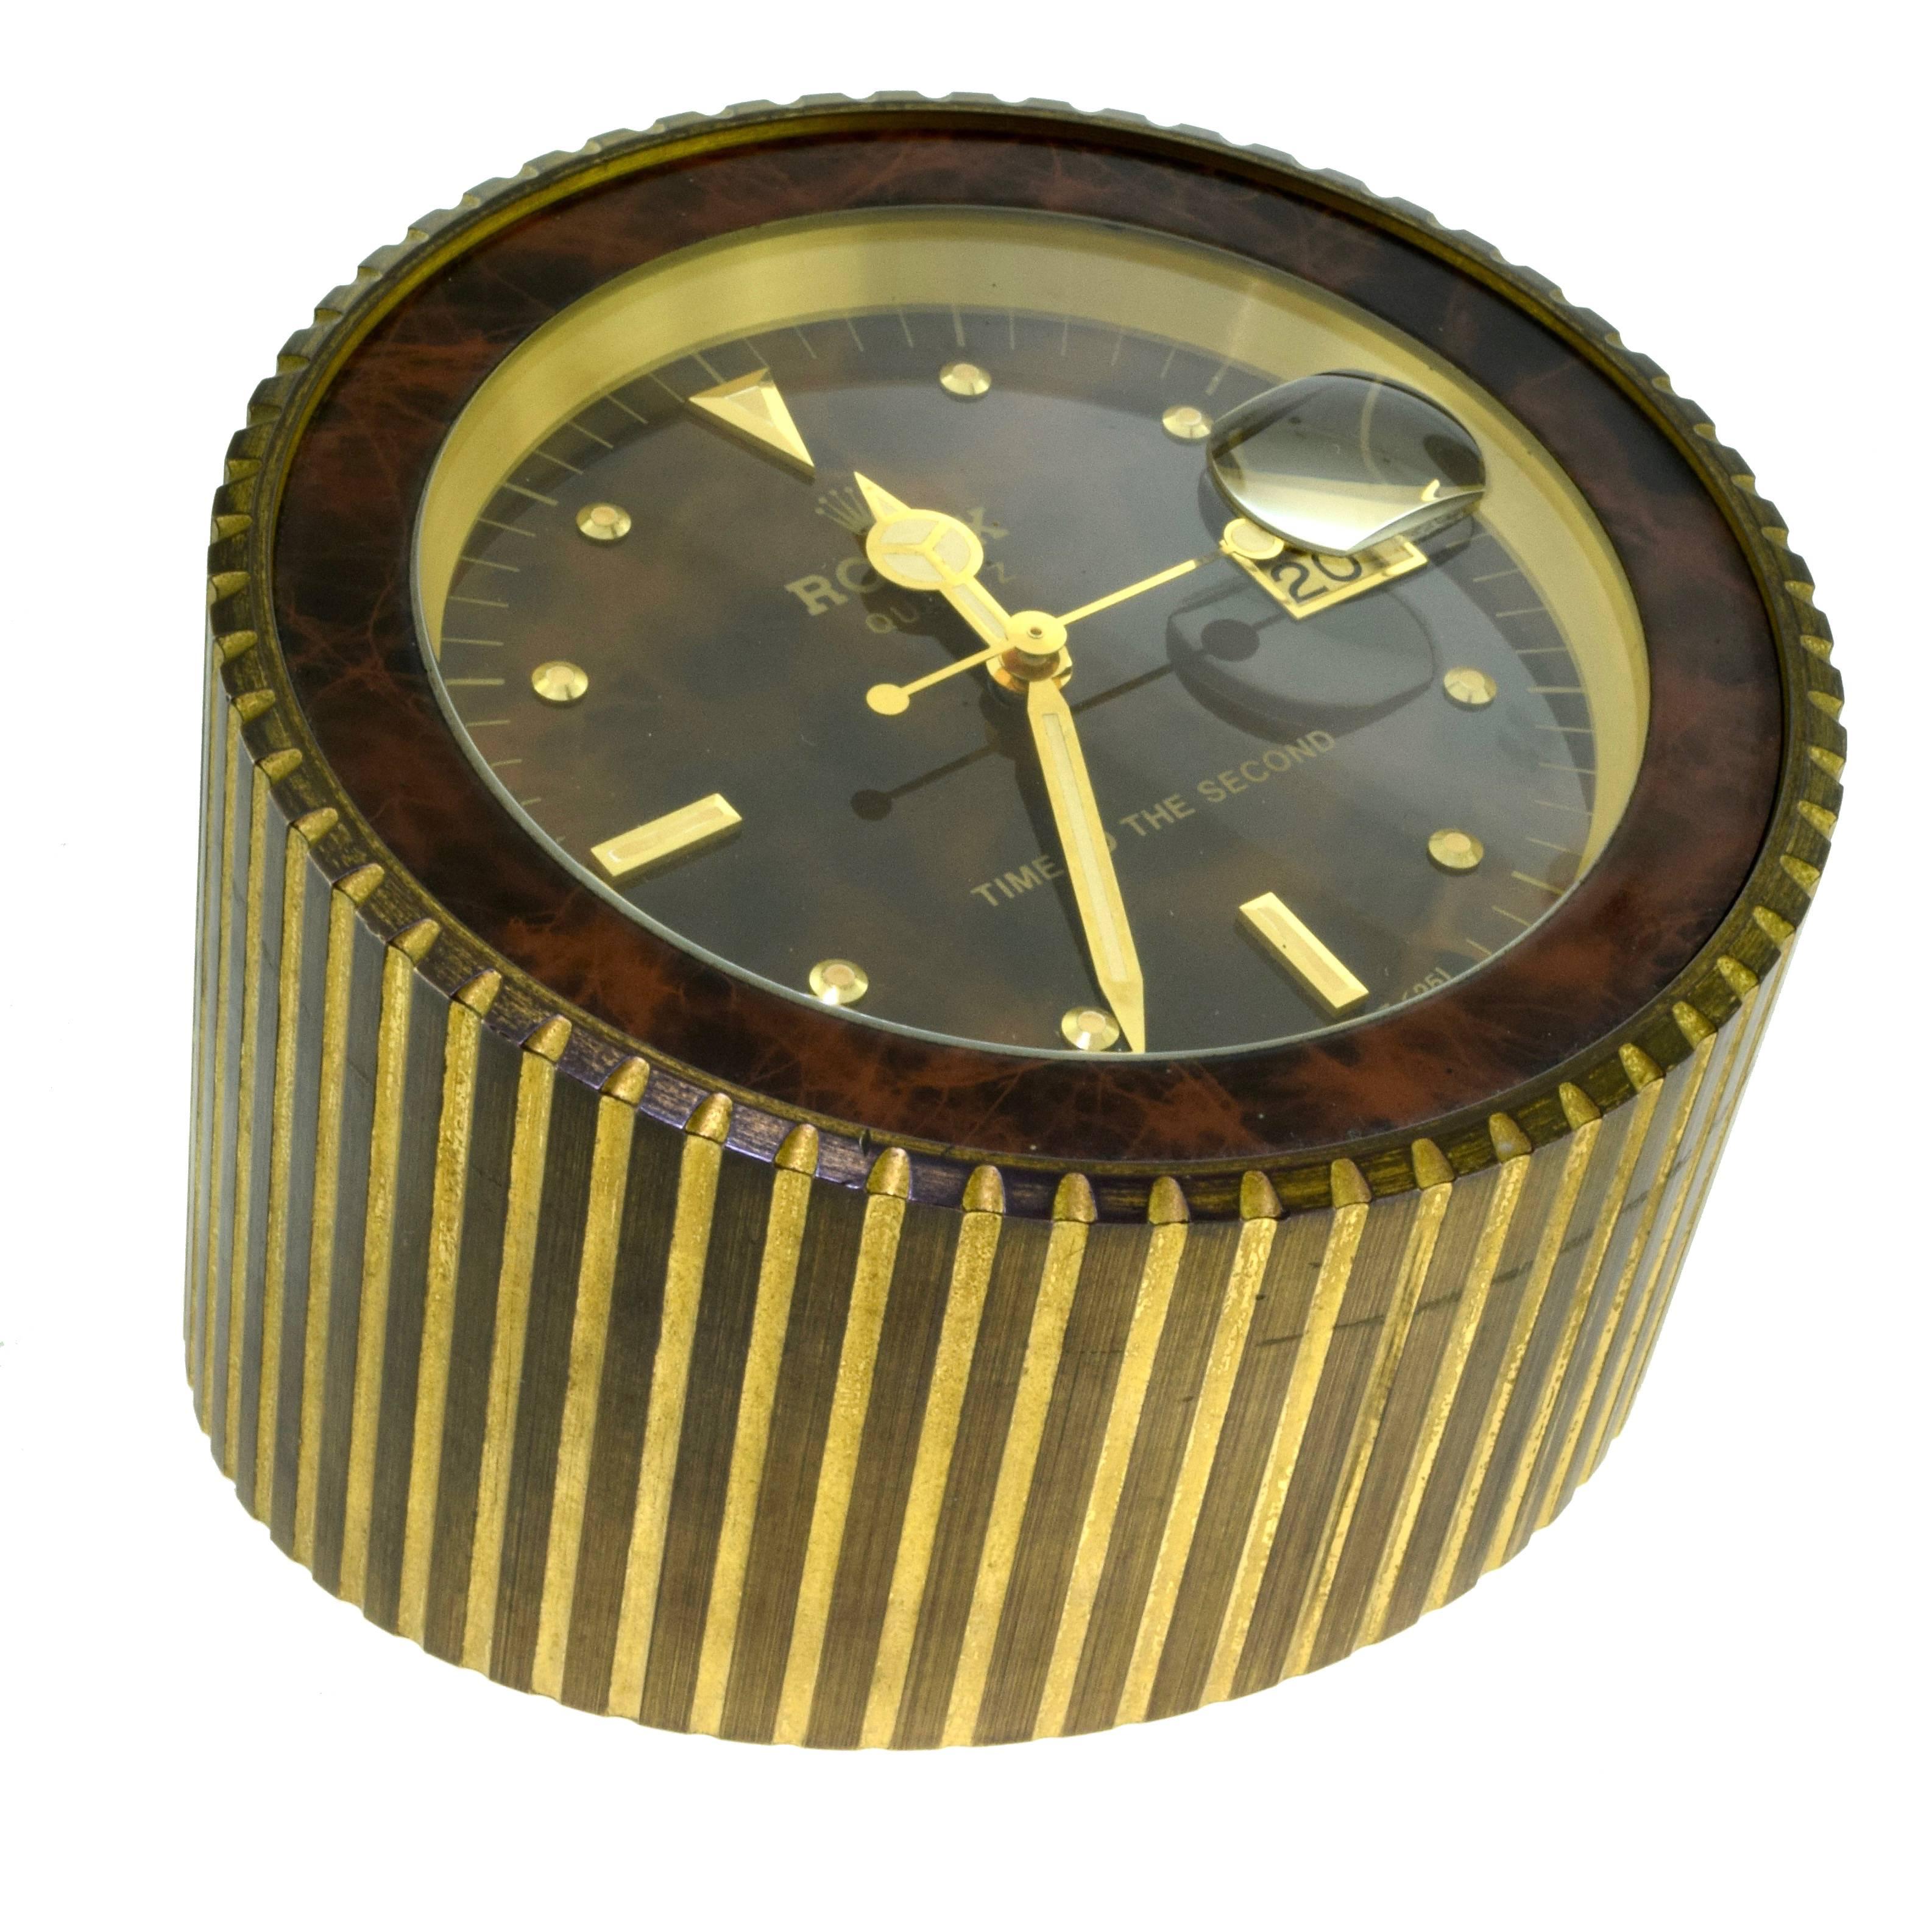 Brand: Rolex
Ref. No.: 455 
Total Item Weight (g): 2335
Diameter: 4.75 inches
Height: 2.5 " tapering up to 4 "
Battery Operated​​​​​​​

Rolex. A Gilt Metal Quartz Desk Clock with Dead Center Seconds and Date 
Signed Rolex Quartz, Time to